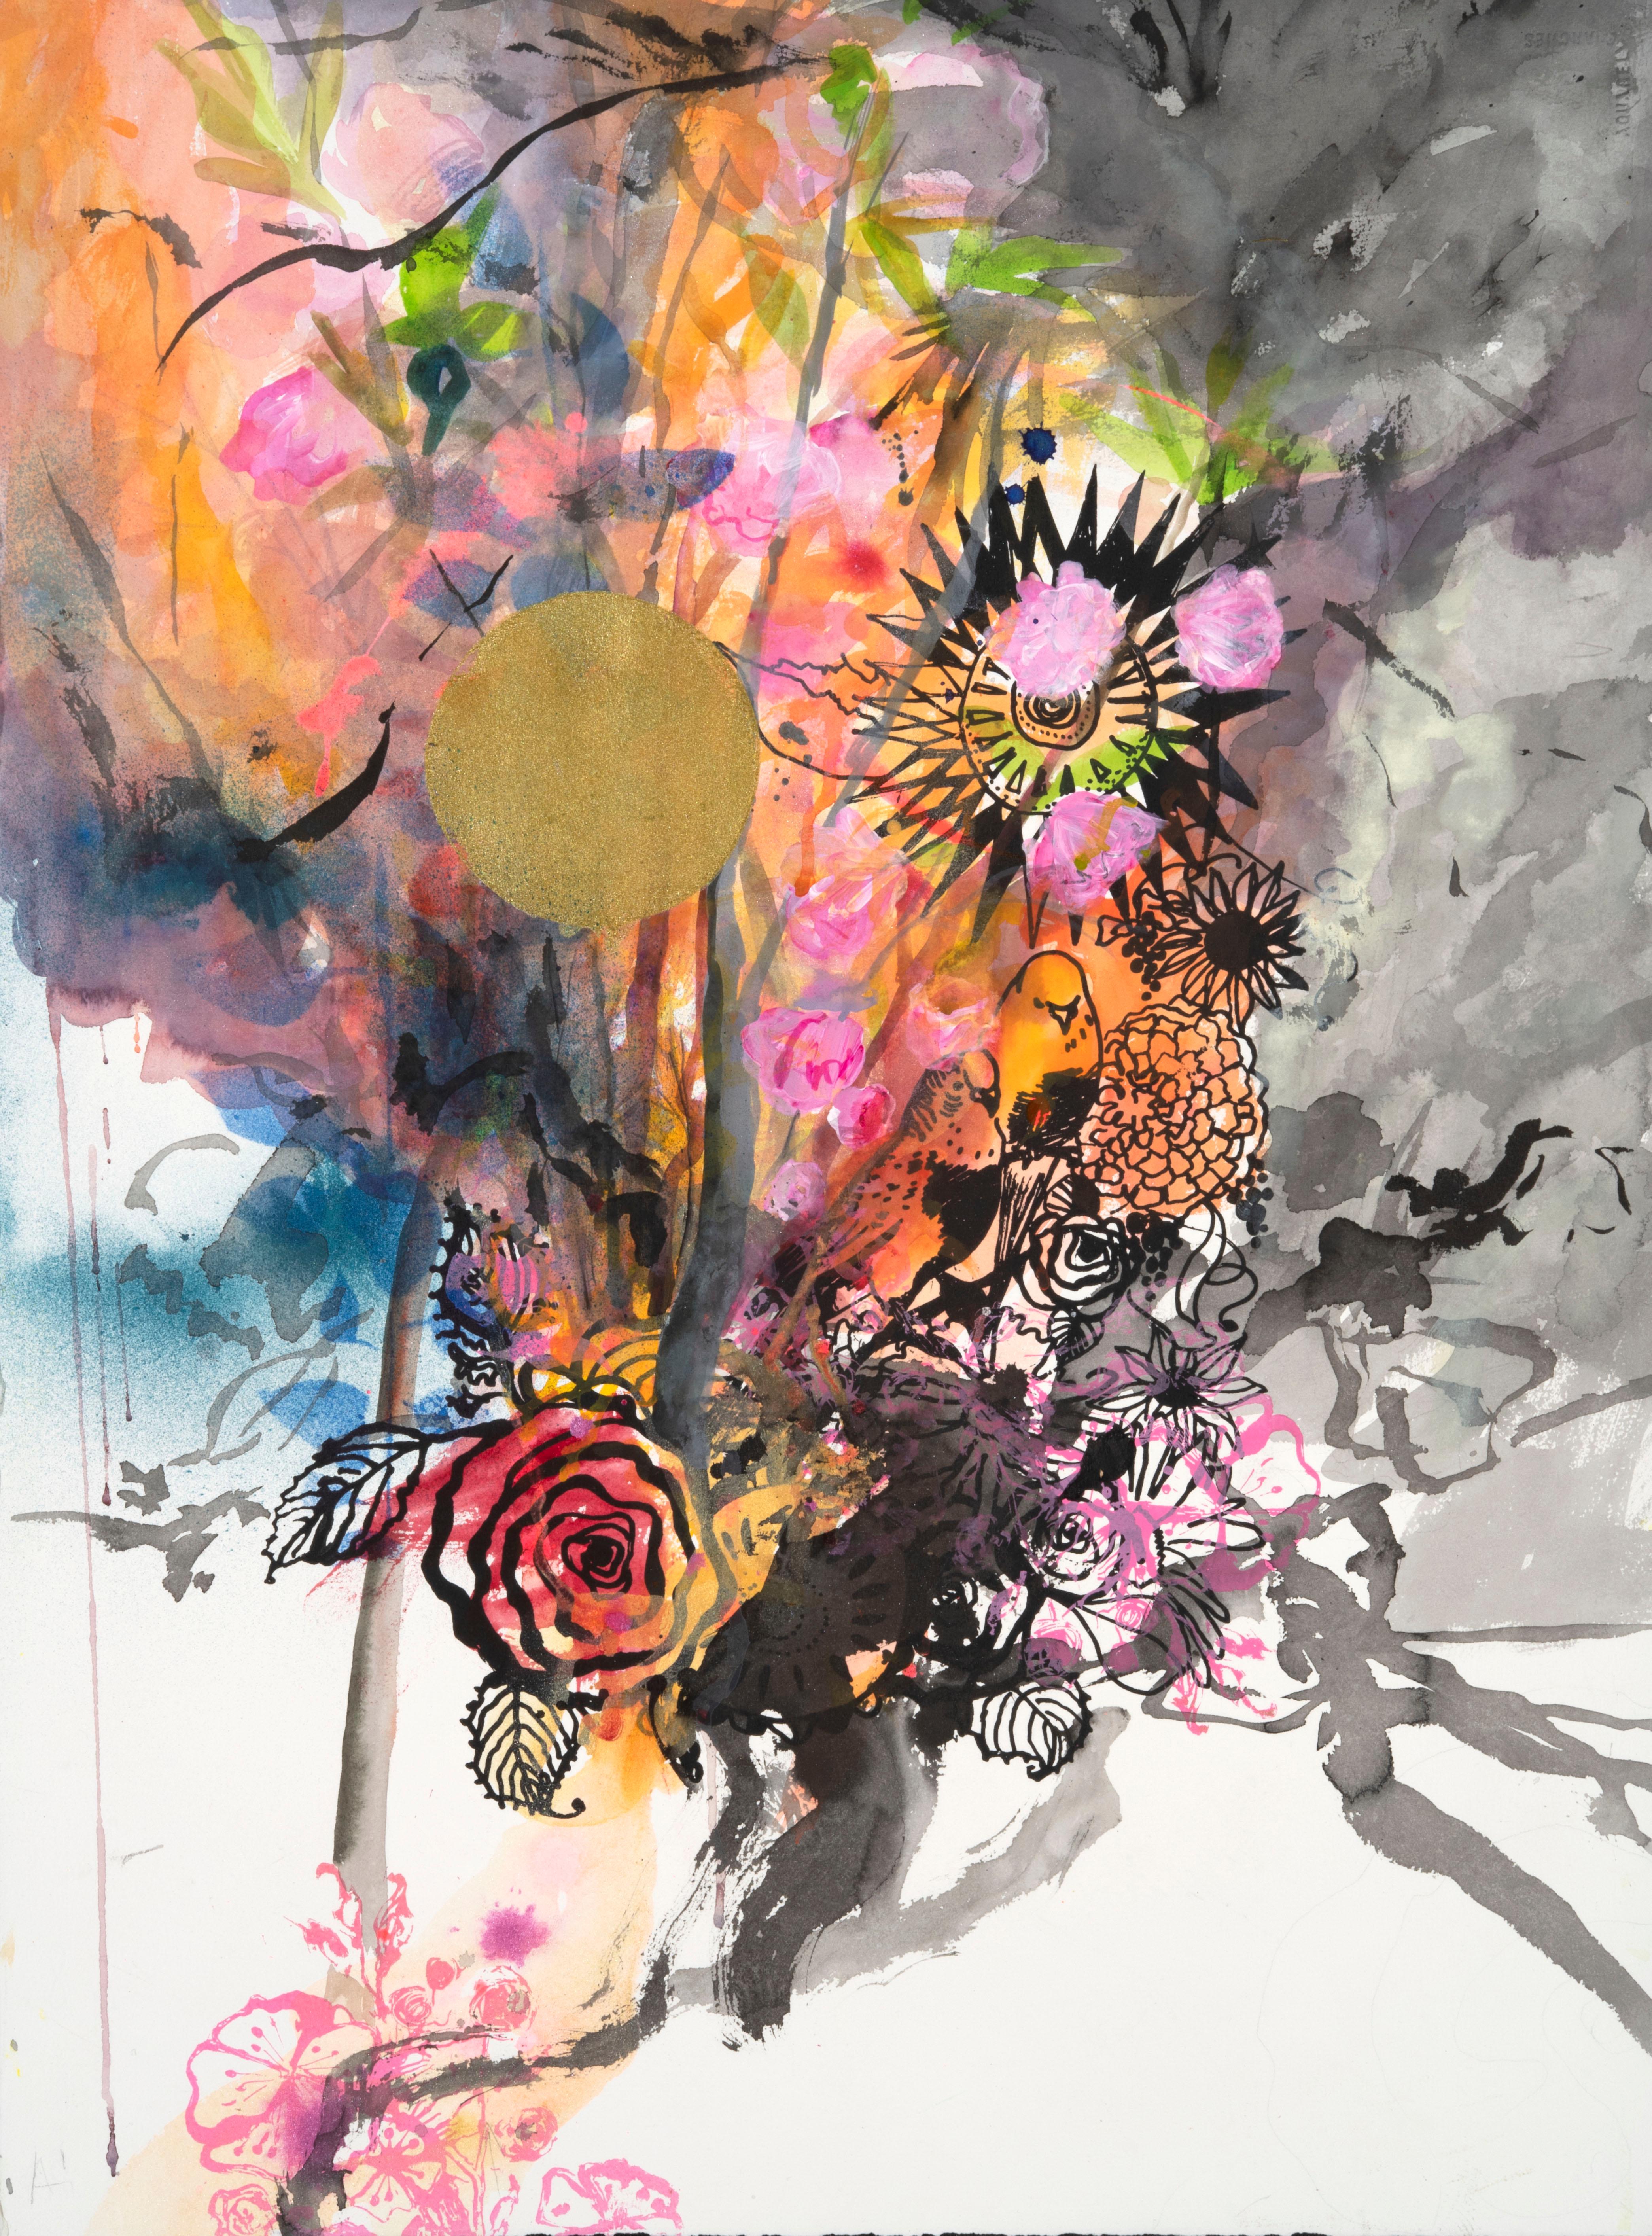 Botanical Painting Ode to Angelo - Malibu - Mixed Media Art by Maryanne Pollock